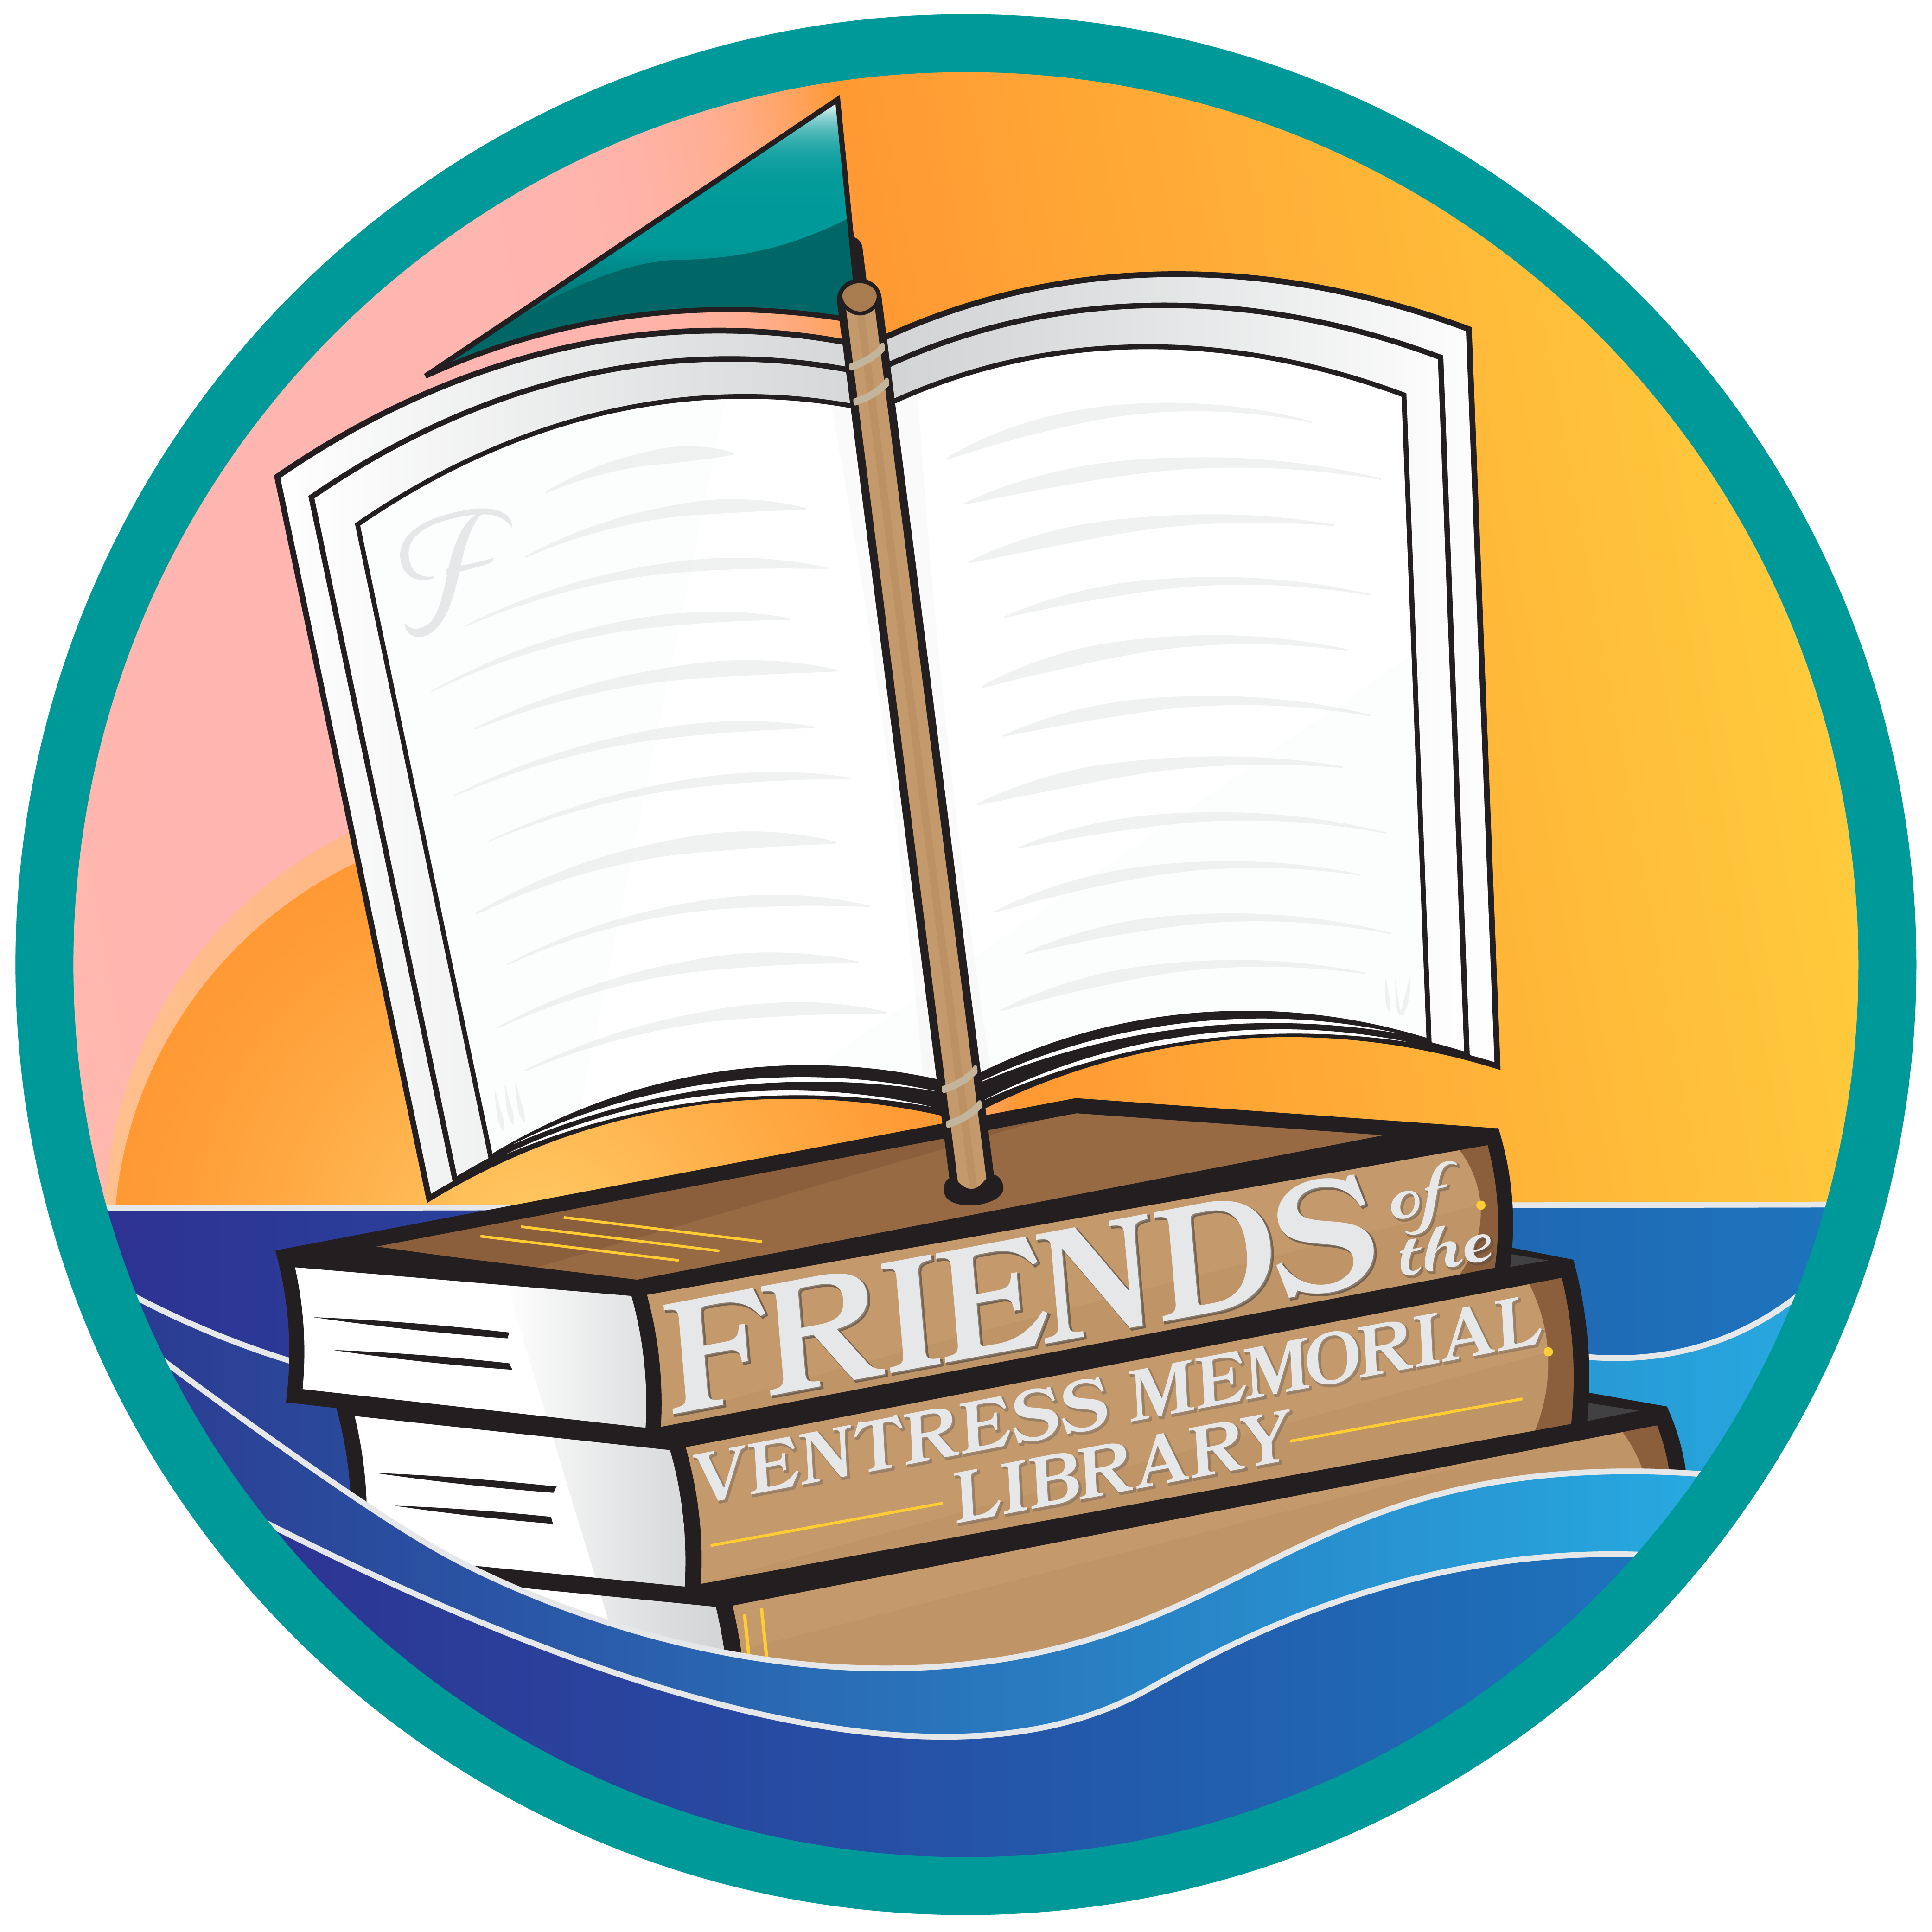 Friends of the Ventress Memorial Library